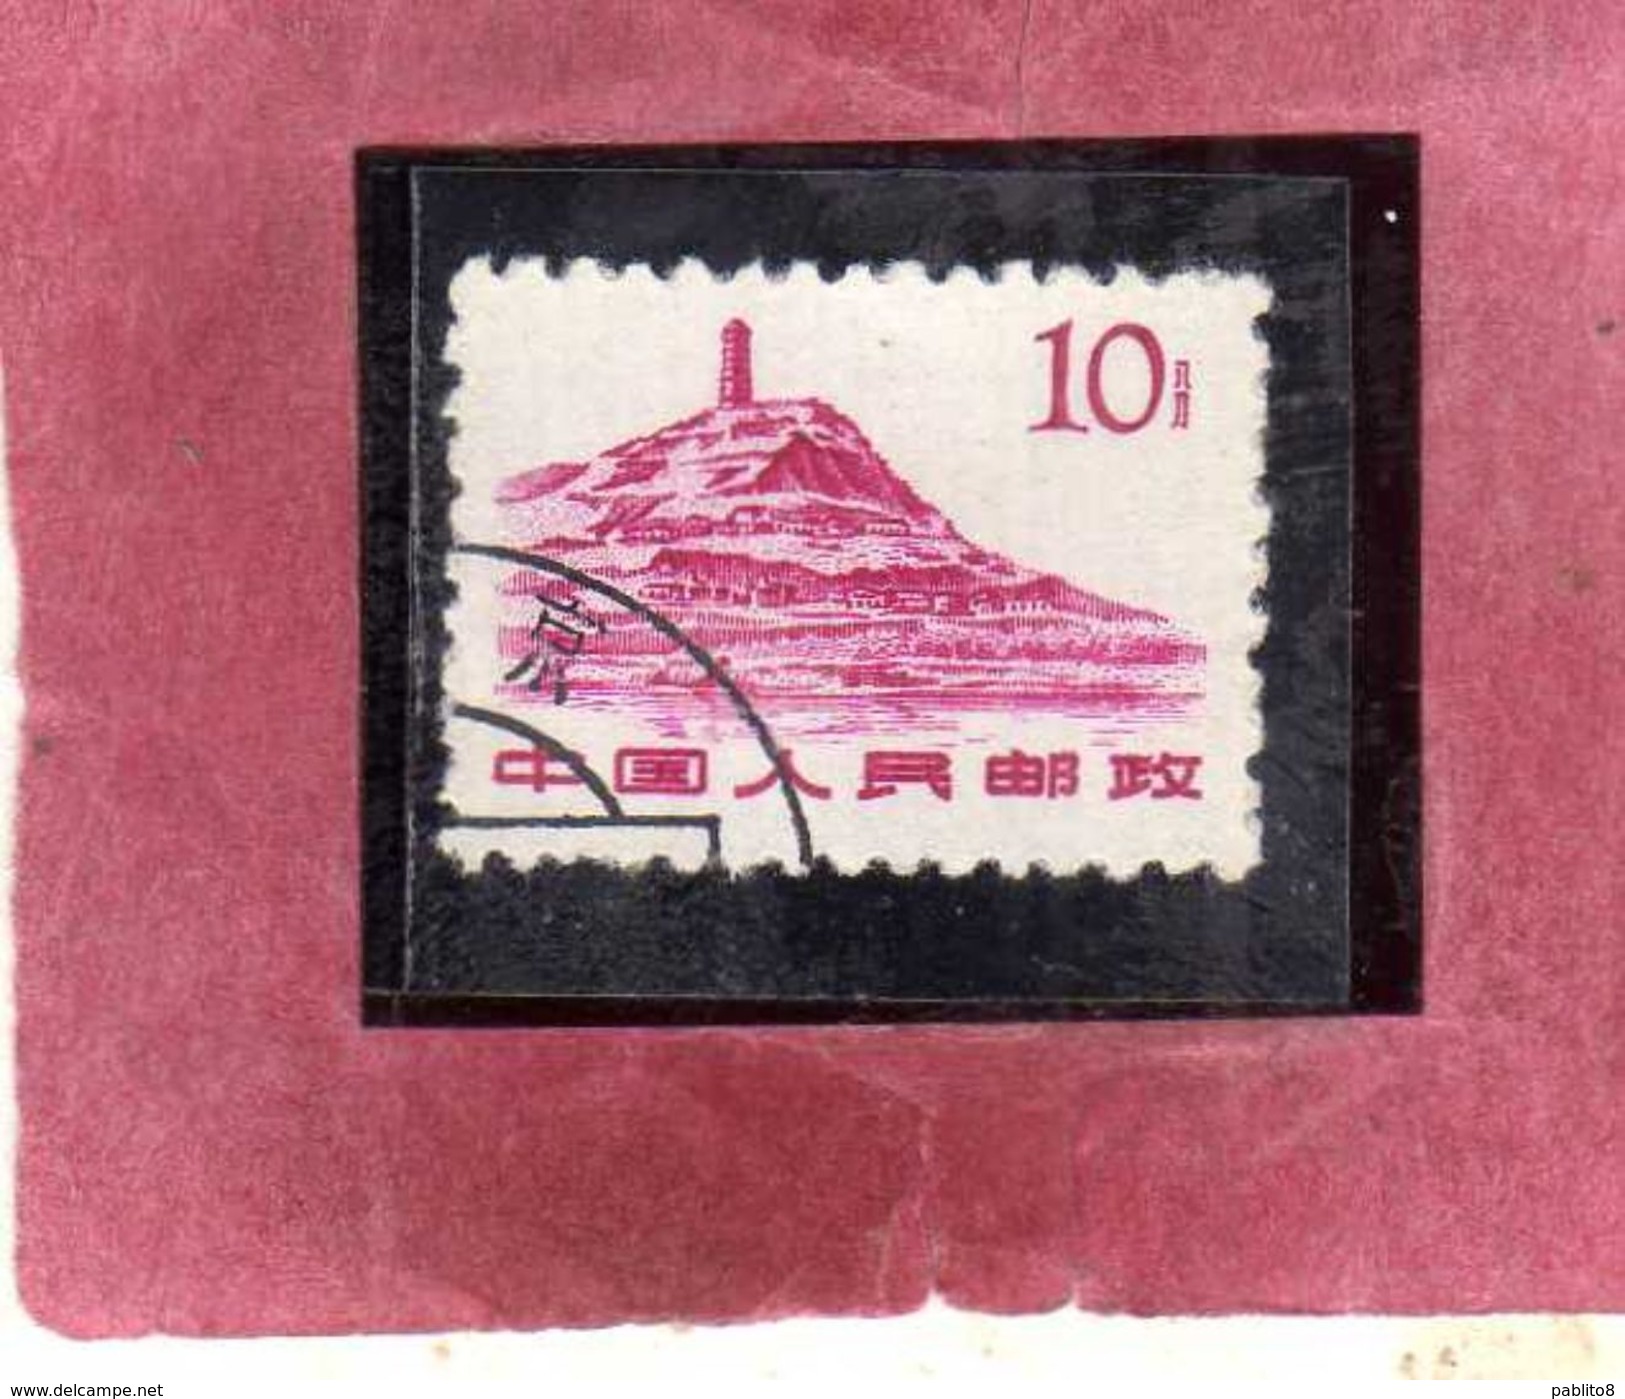 CHINA CINA 1961 BUILDINGS PAGODA HILL YENAN 10f USATO USED OBLITERE' - Used Stamps